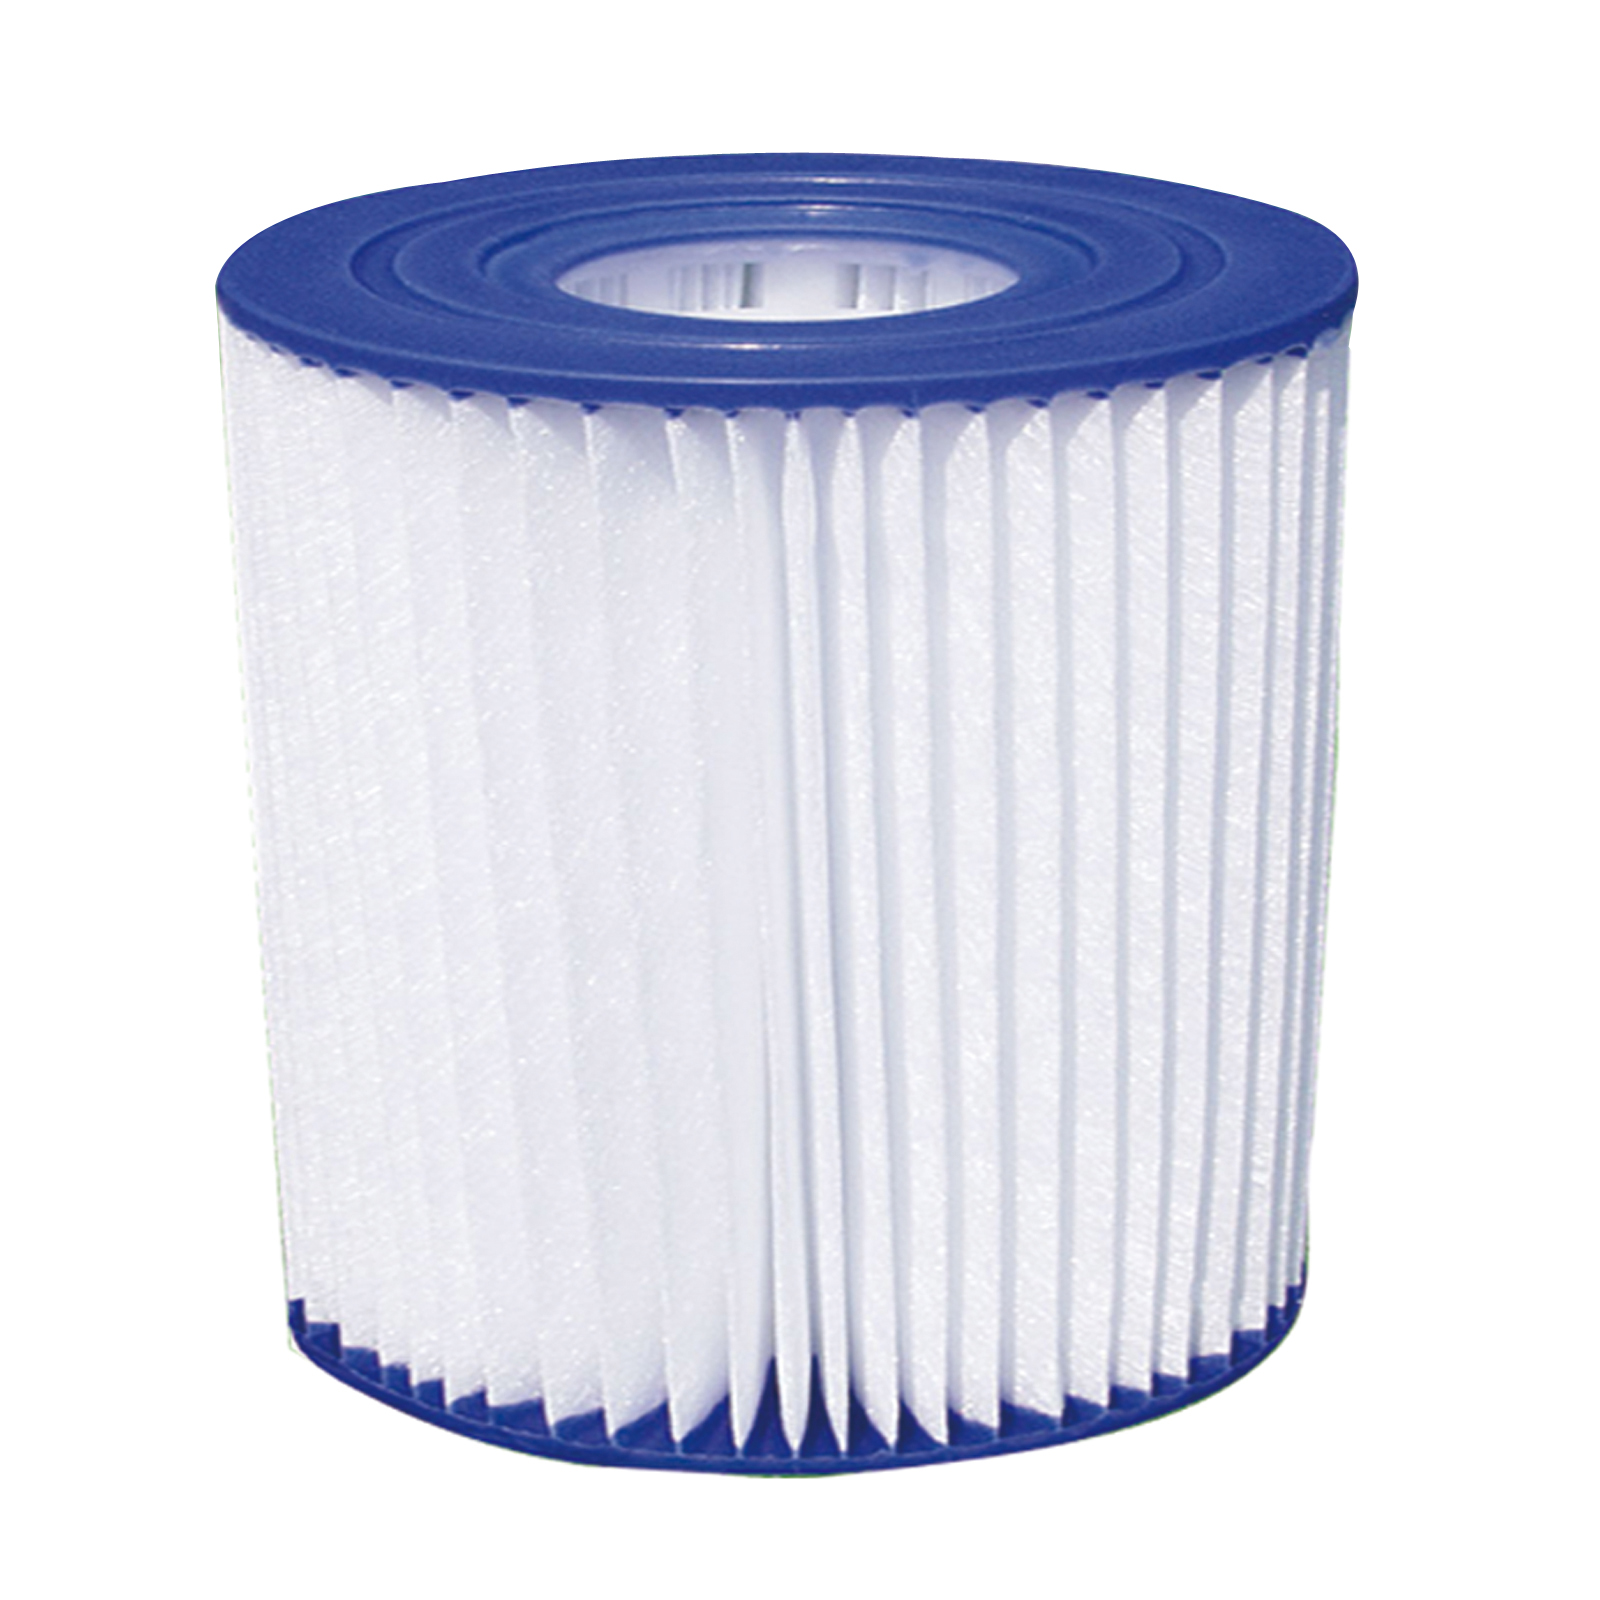 Summer Escapes Type D Pool Filter Cartridge 2-Pack | Shop Your Way